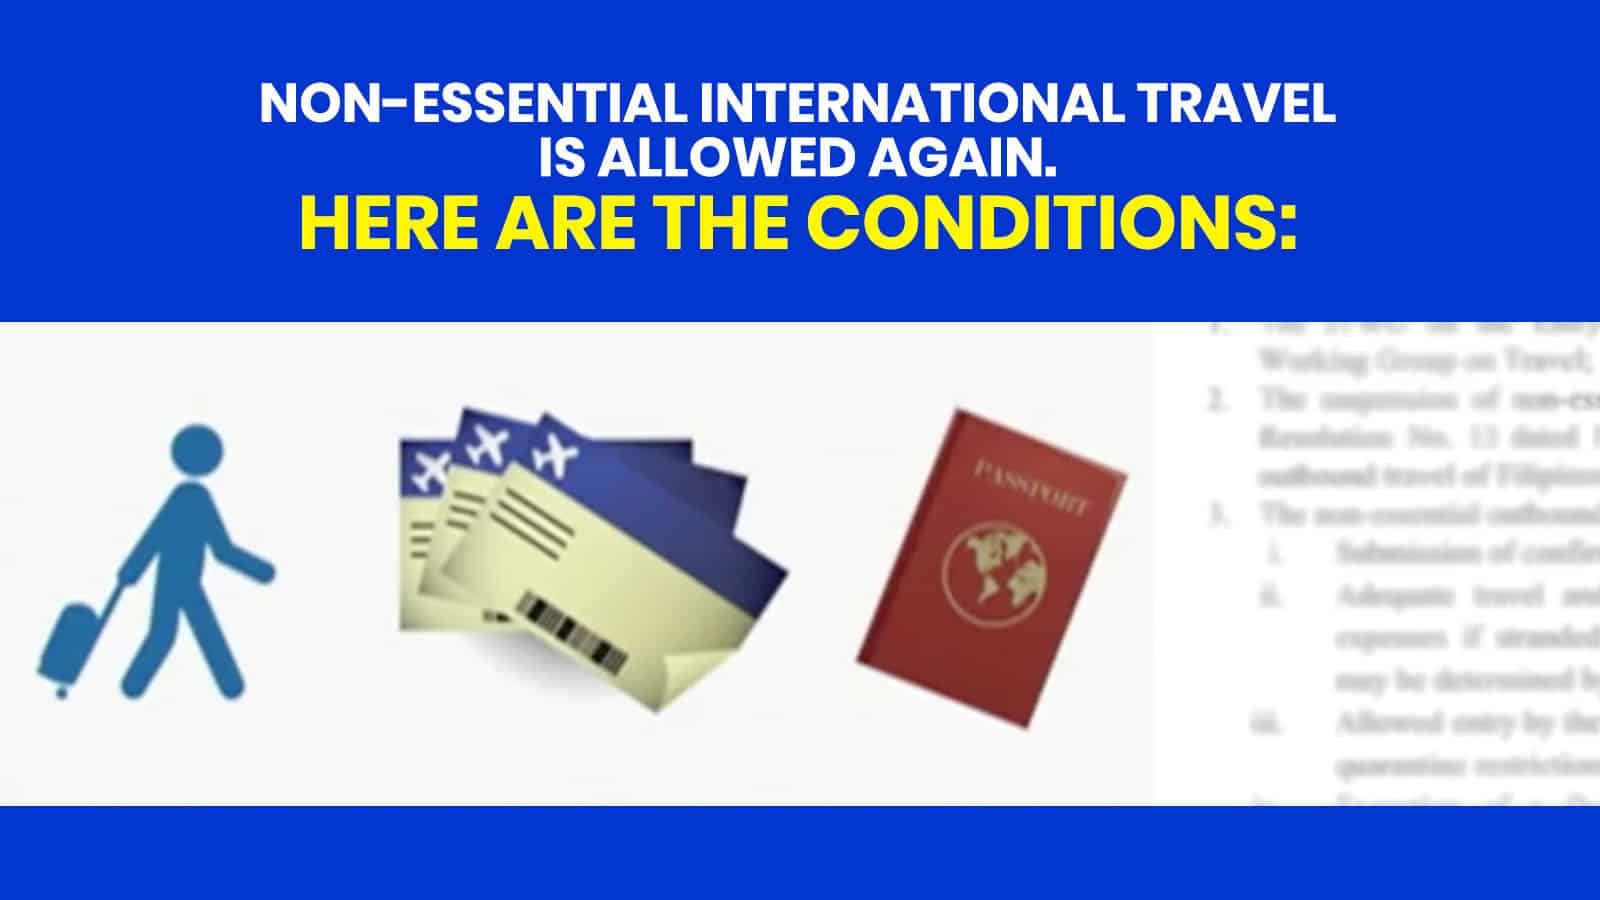 Requirements for Non-Essential International Travel for Filipinos